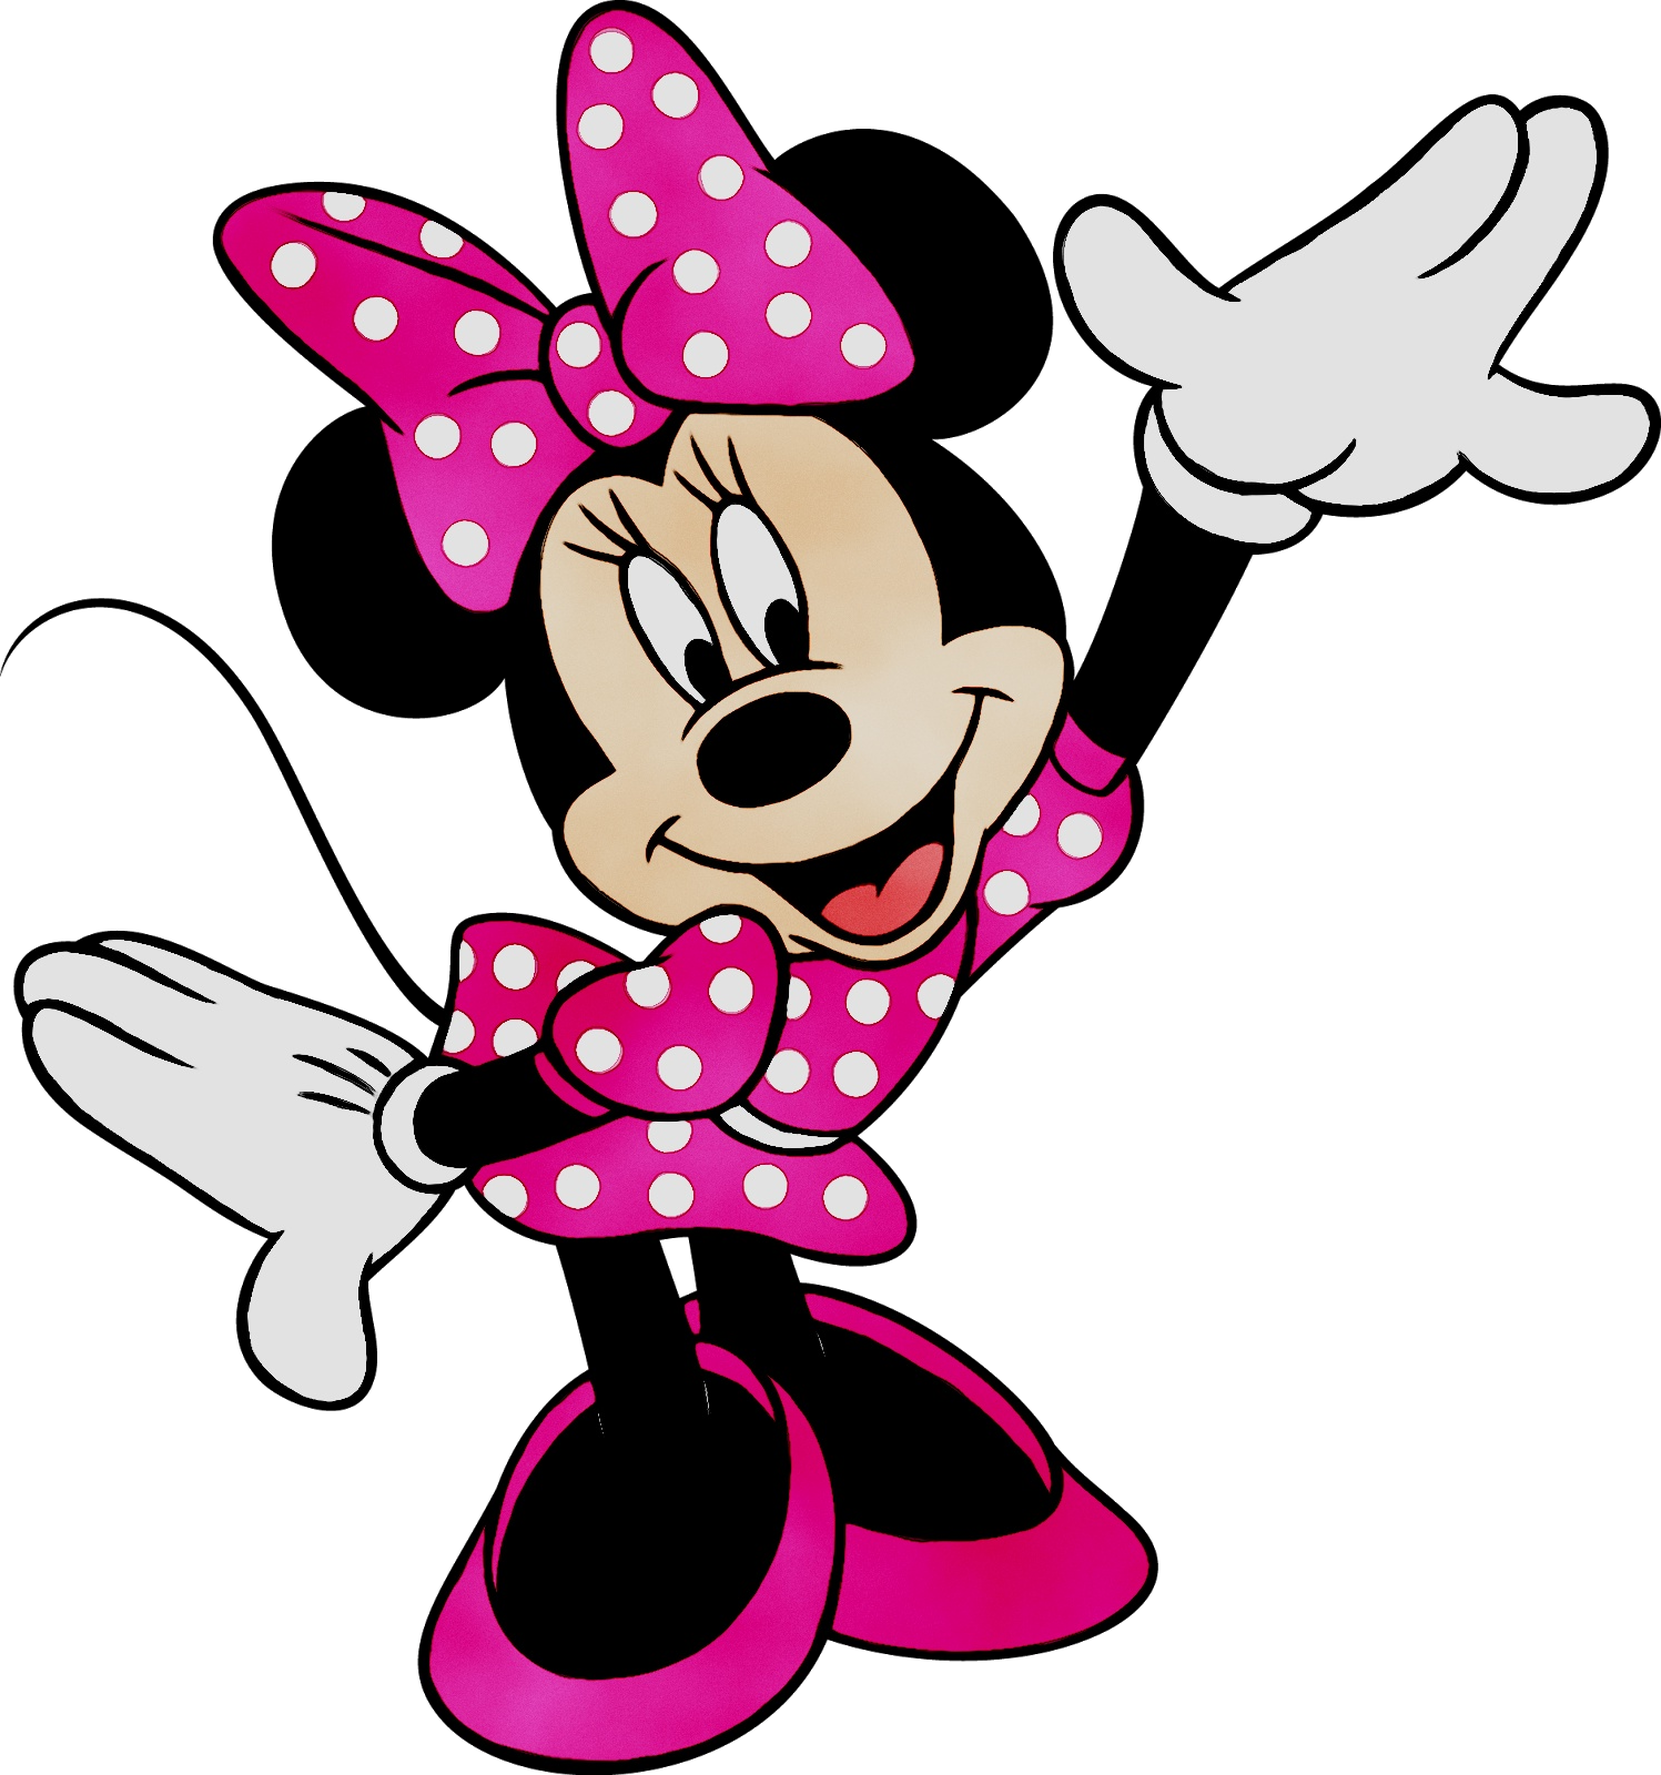 Download Minnie Mouse Clip Art Pink Minnie Mouse Clip